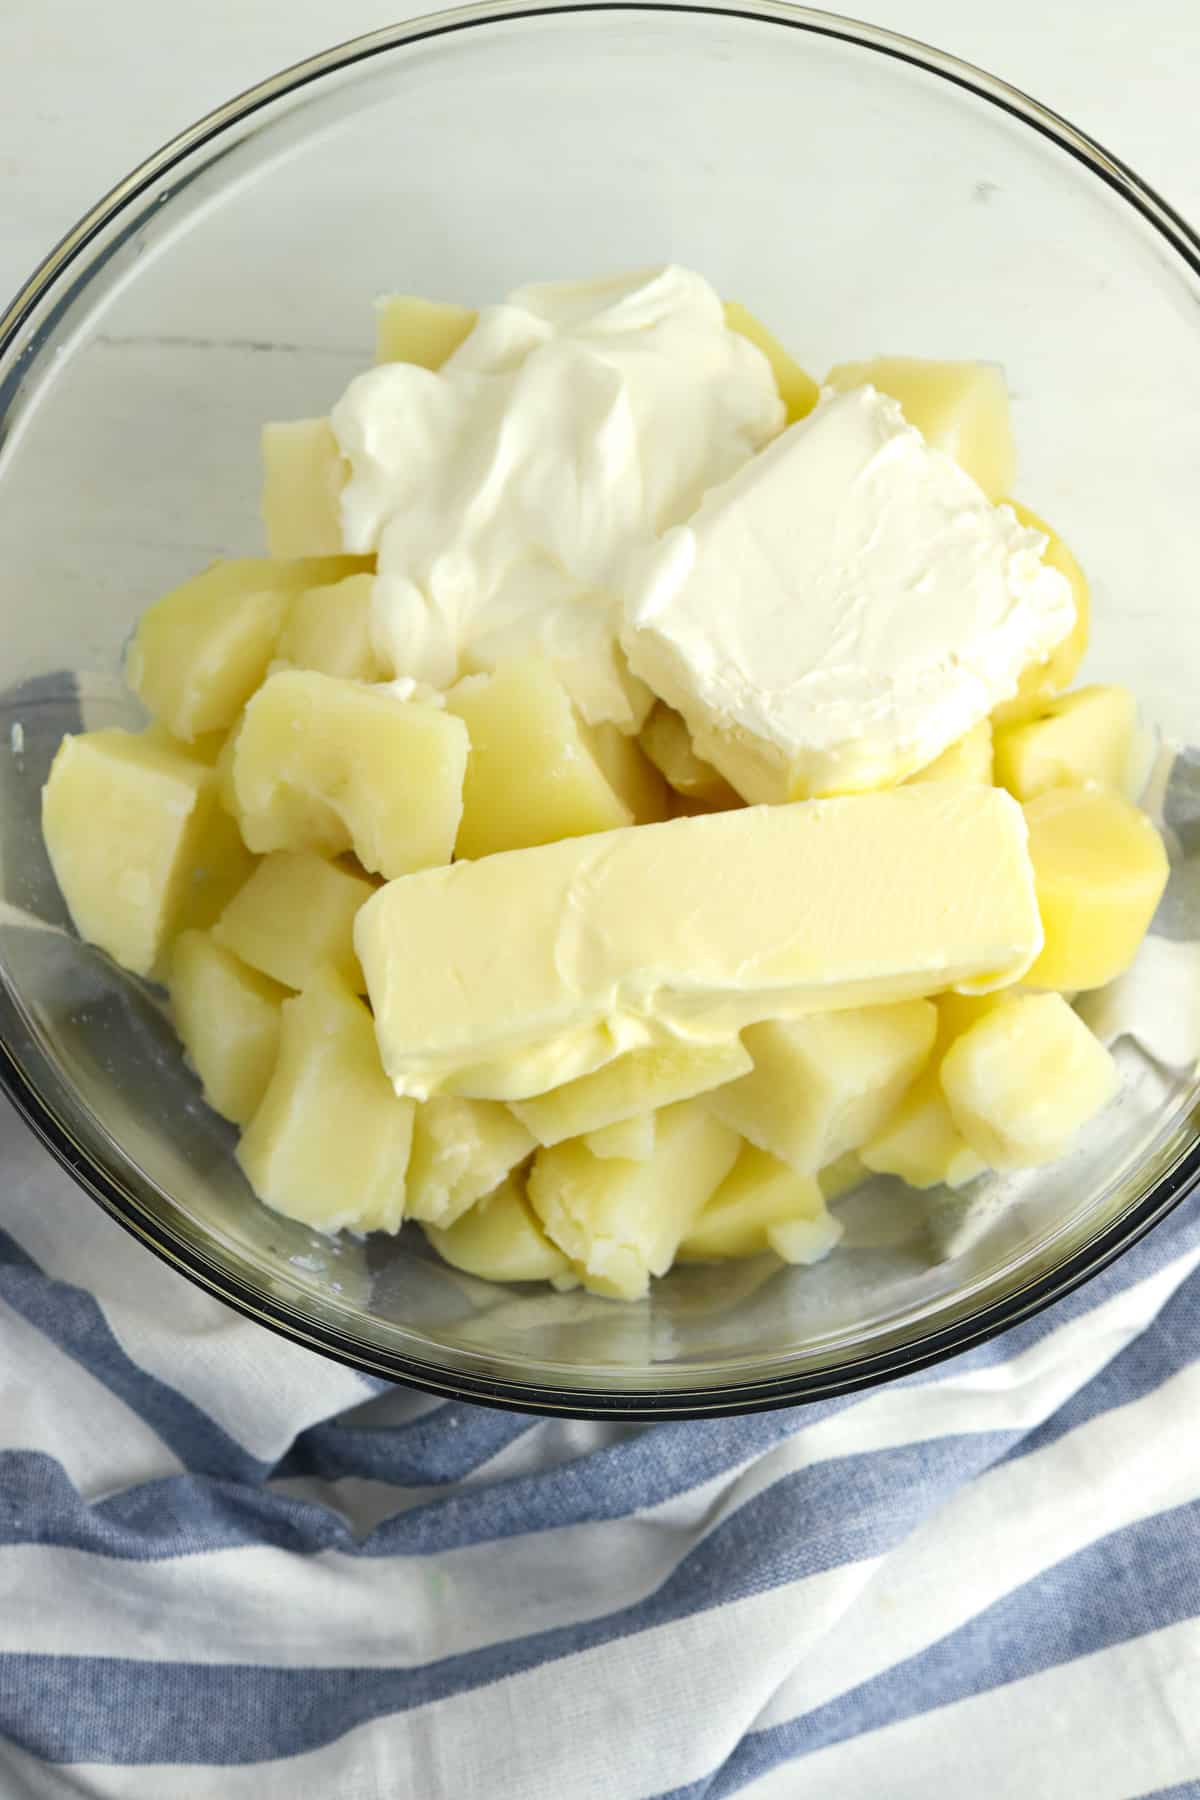 A mixing bowl filled with cooked potatoes, butter, and sour cream and cream cheese